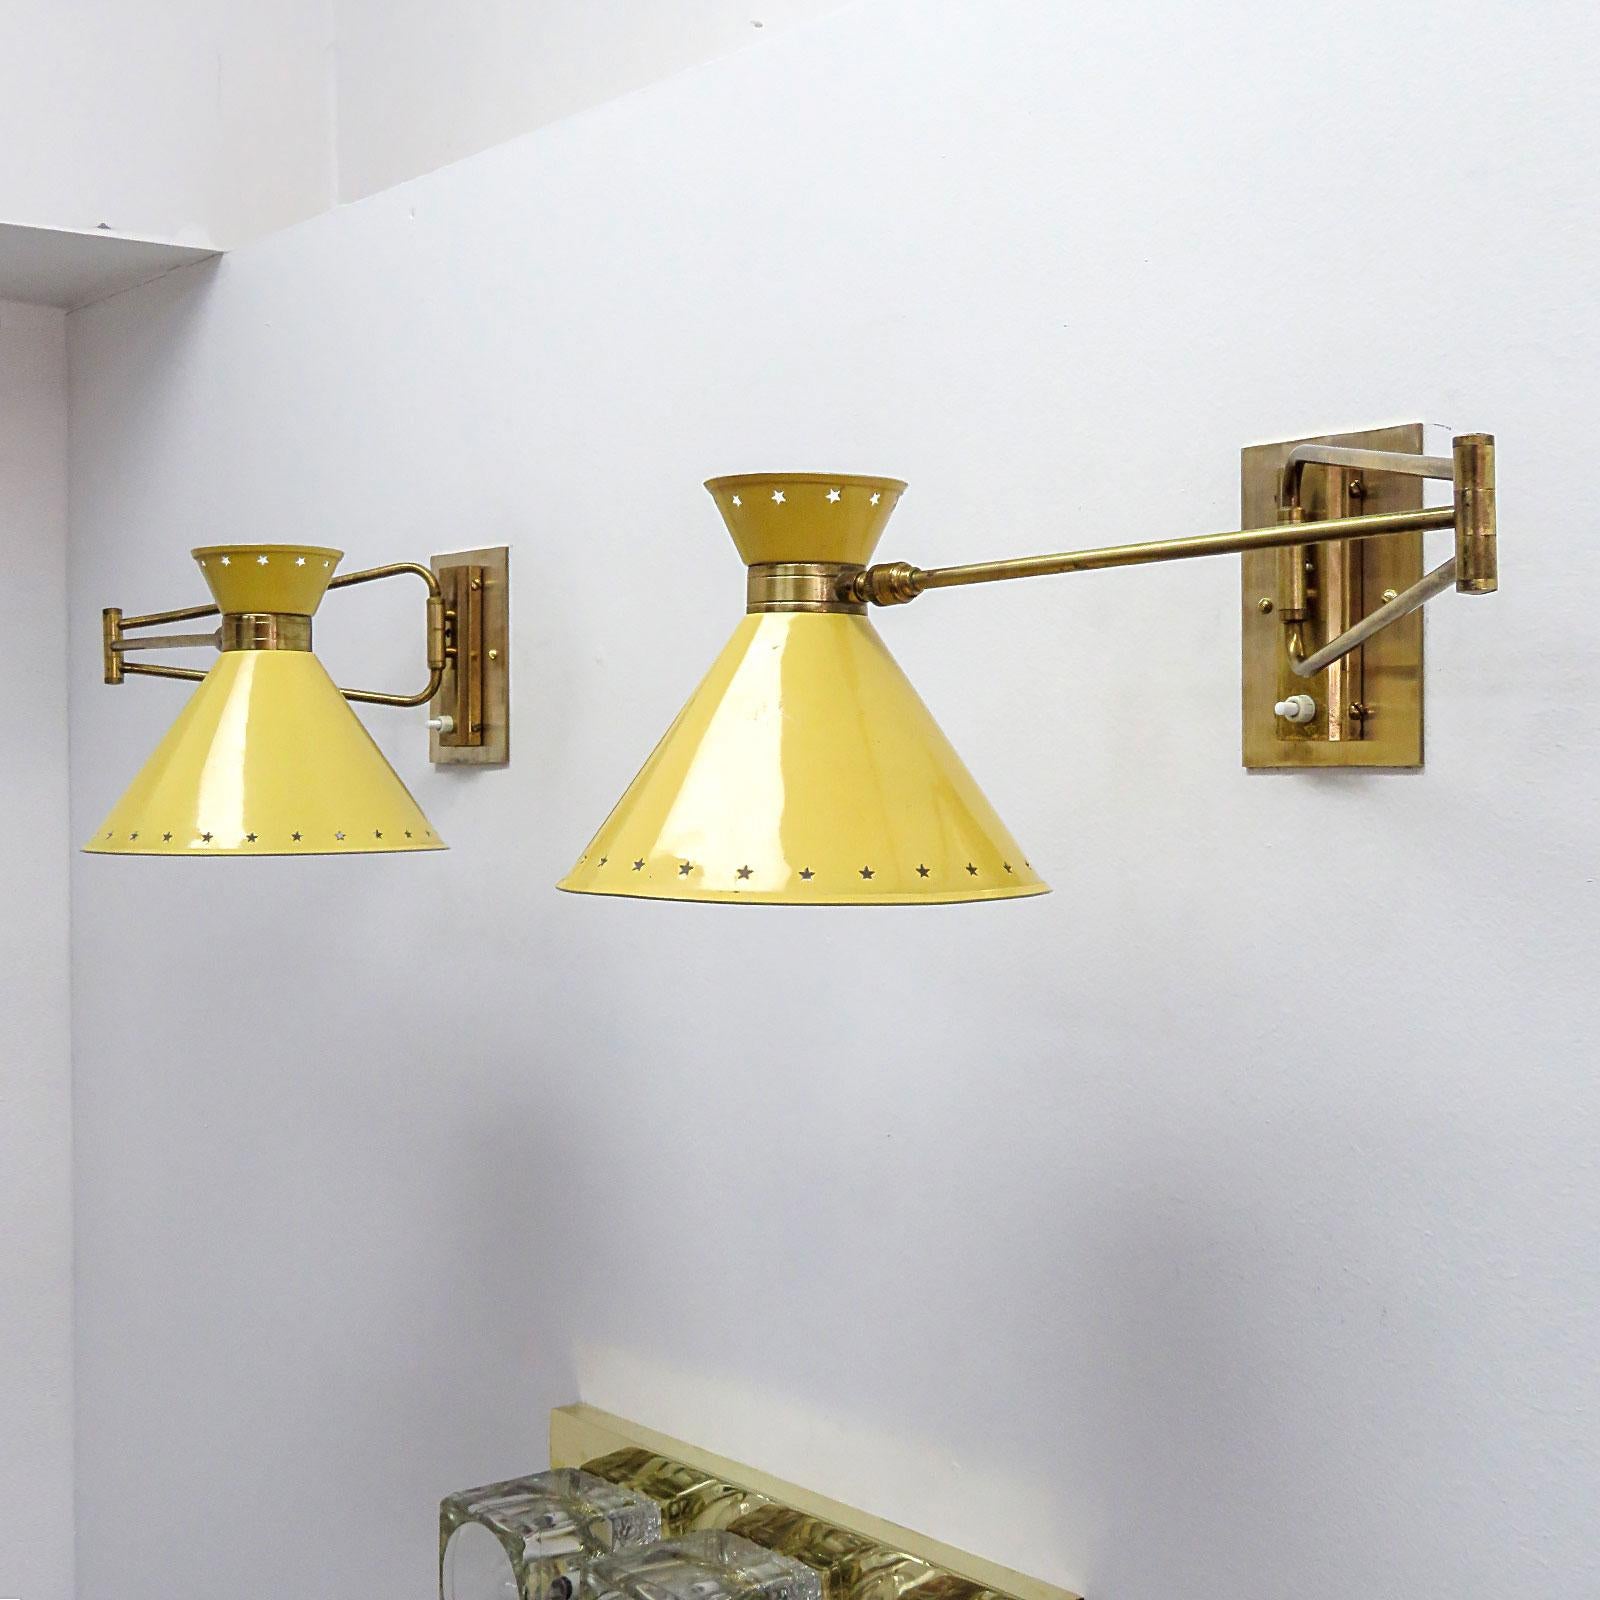 Enameled Swing Arm Wall Light by Rene Mathieu for Lunel, 1950 For Sale